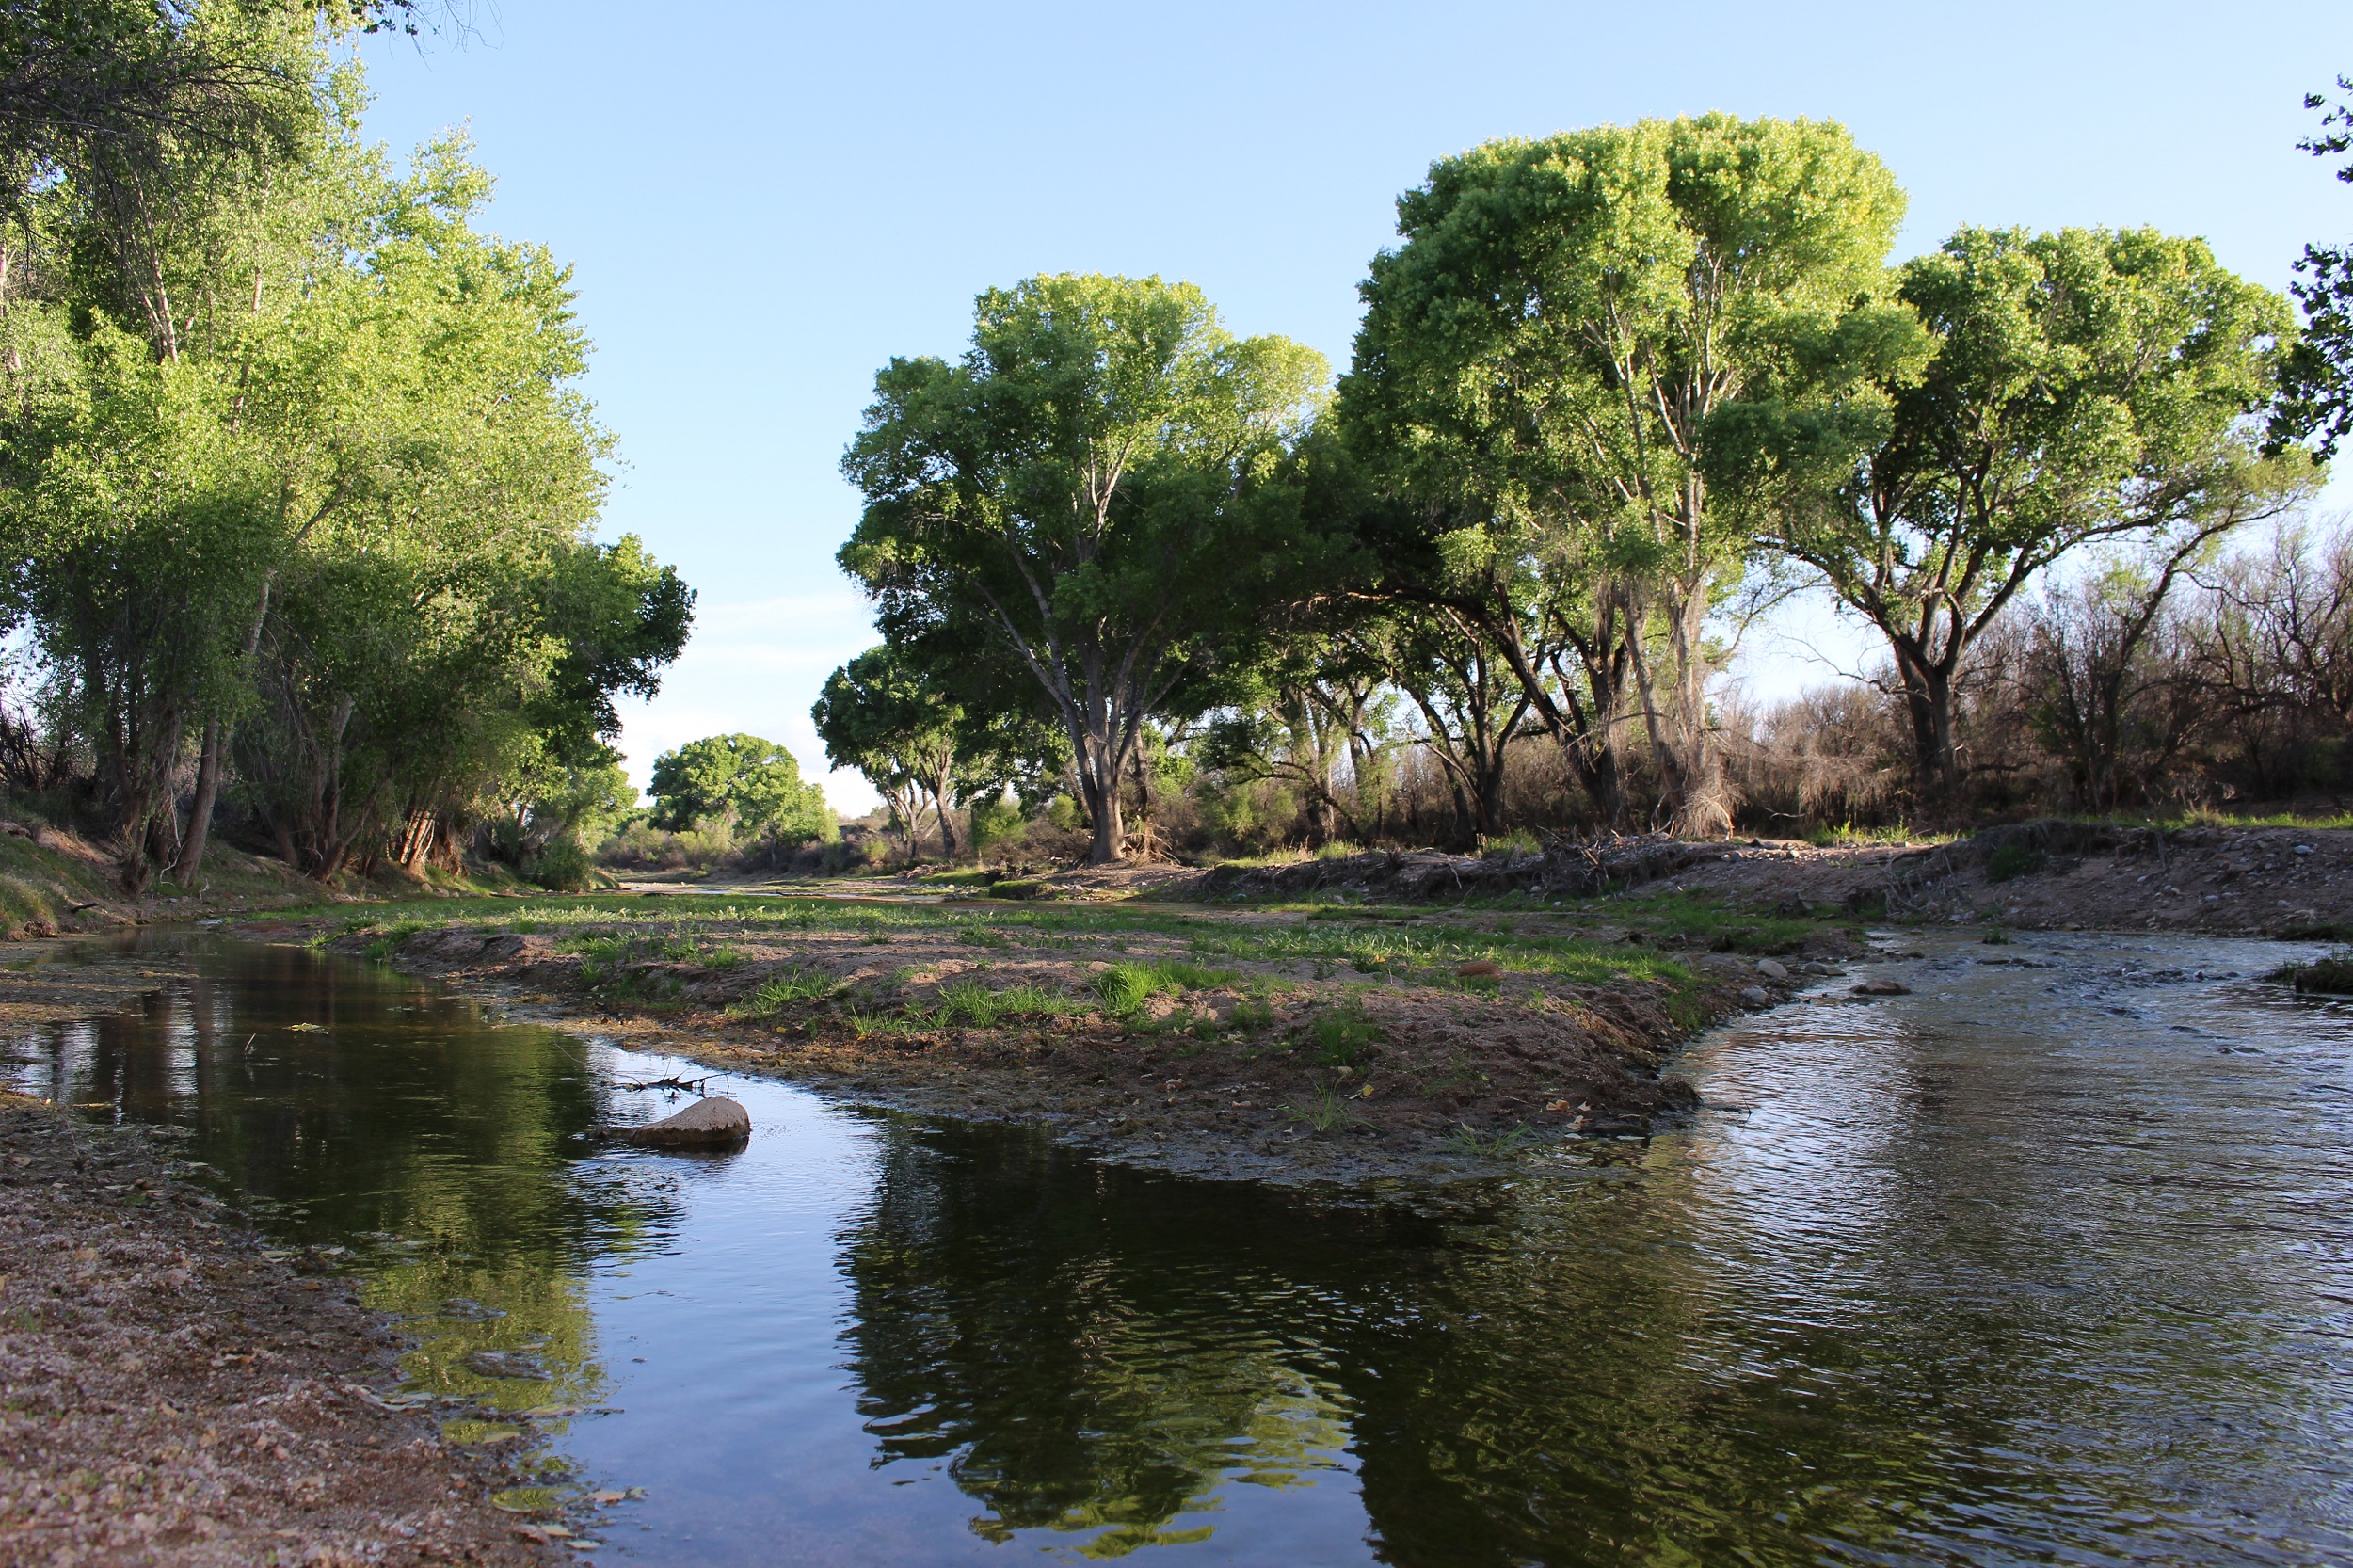 The San Pedro River is fed by groundwater flowing from the San Pedro Aquifer, which spans the U.S.-Mexican border. Through a collaborative research program, scientists are gaining a better understanding of these cross-border aquifers. Photo courtesy of the Bureau of Land Management